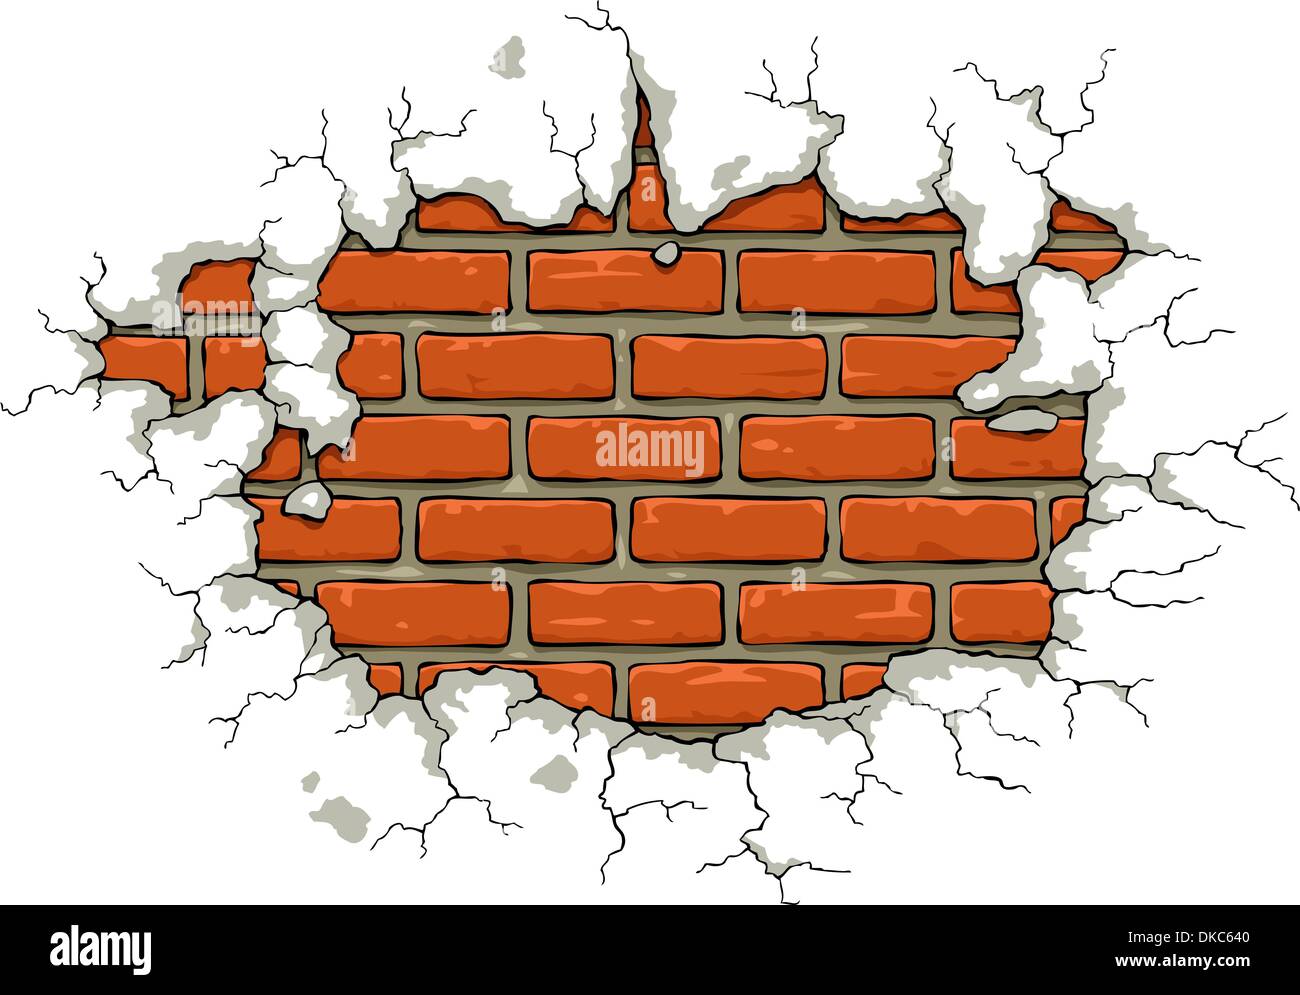 Brick wall with damaged plaster vector illustration Stock Vector